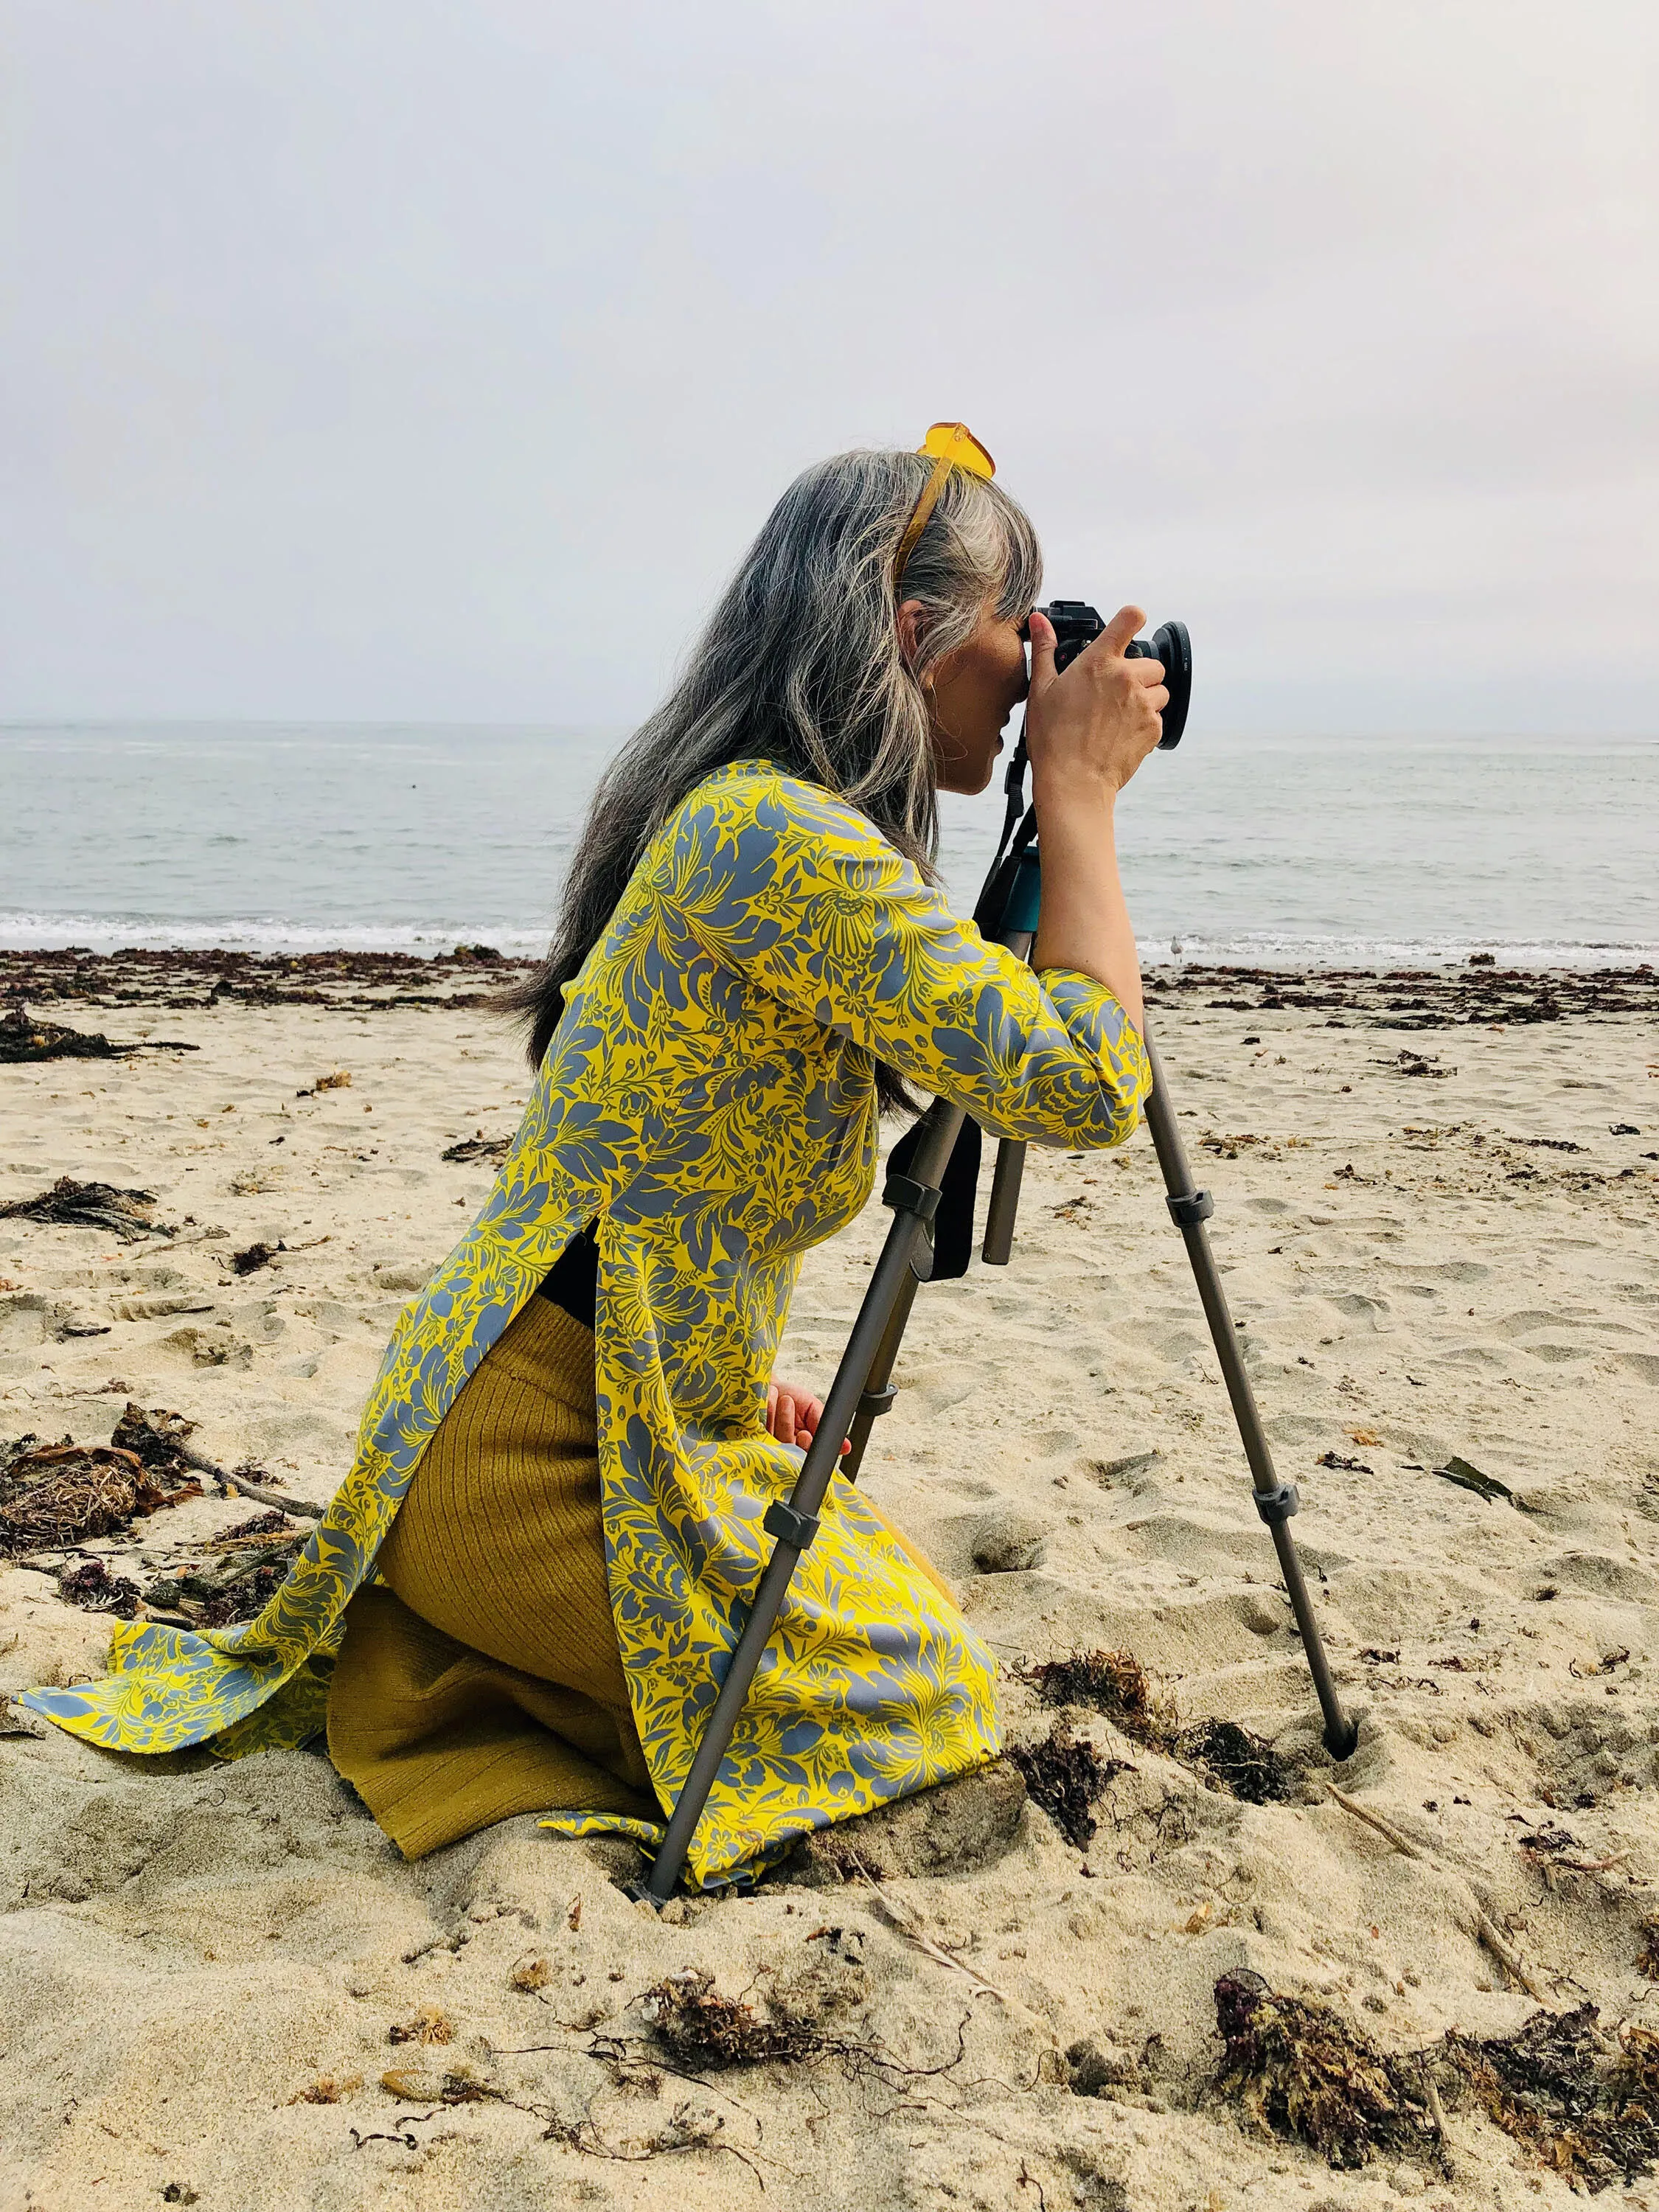 A woman in a yellow dress kneeling and taking a photograph on the beach.